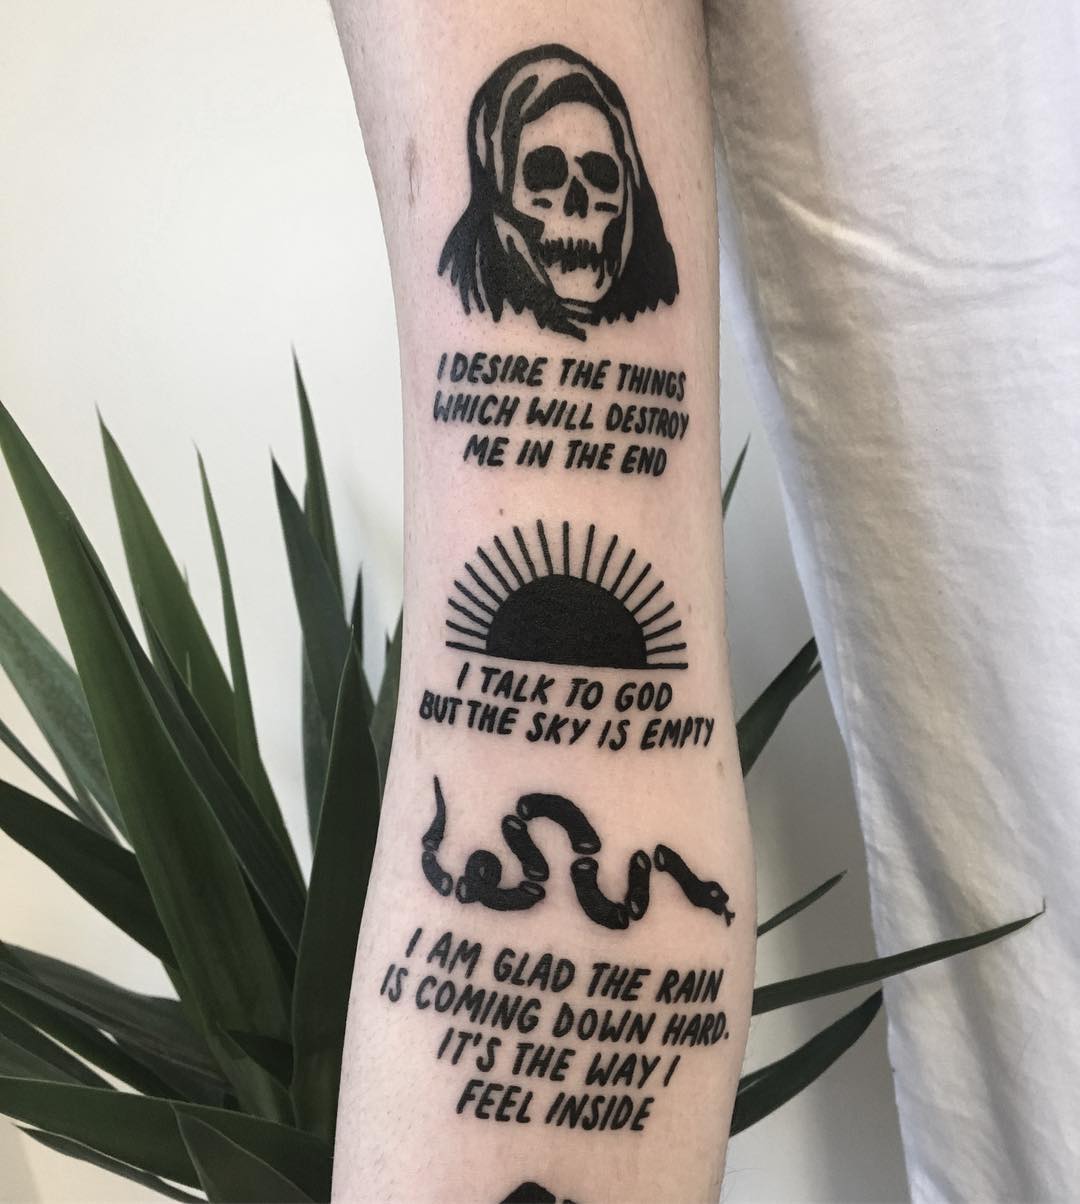 Tattoo of a quote by sylvia plath